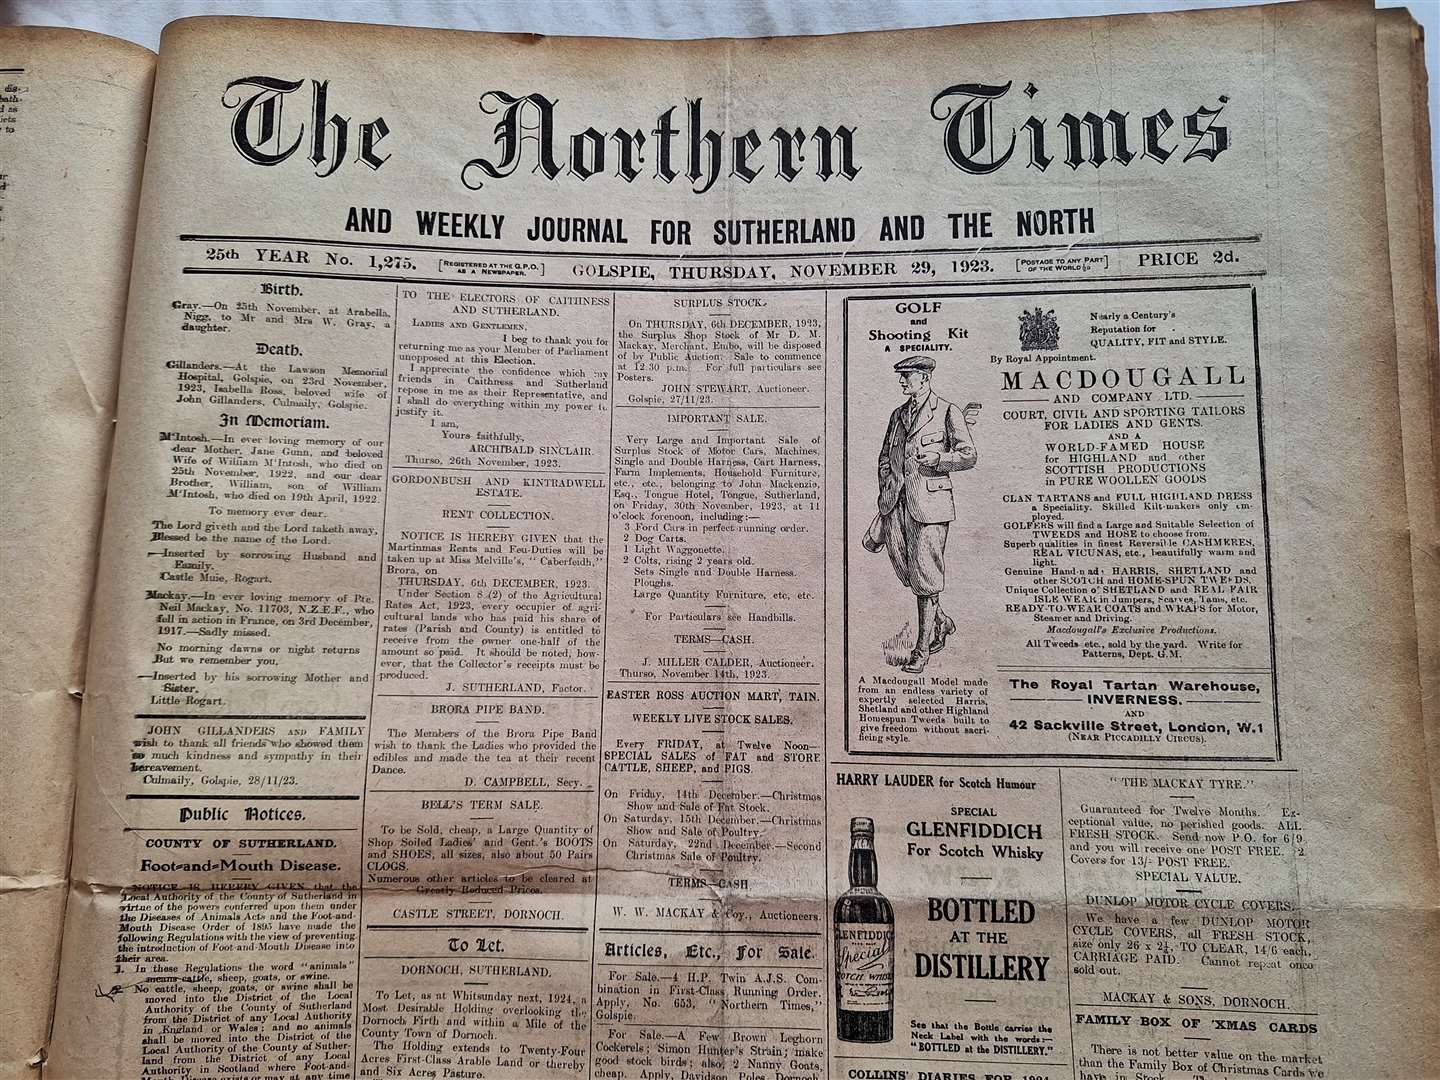 The edition of November 29, 1923.